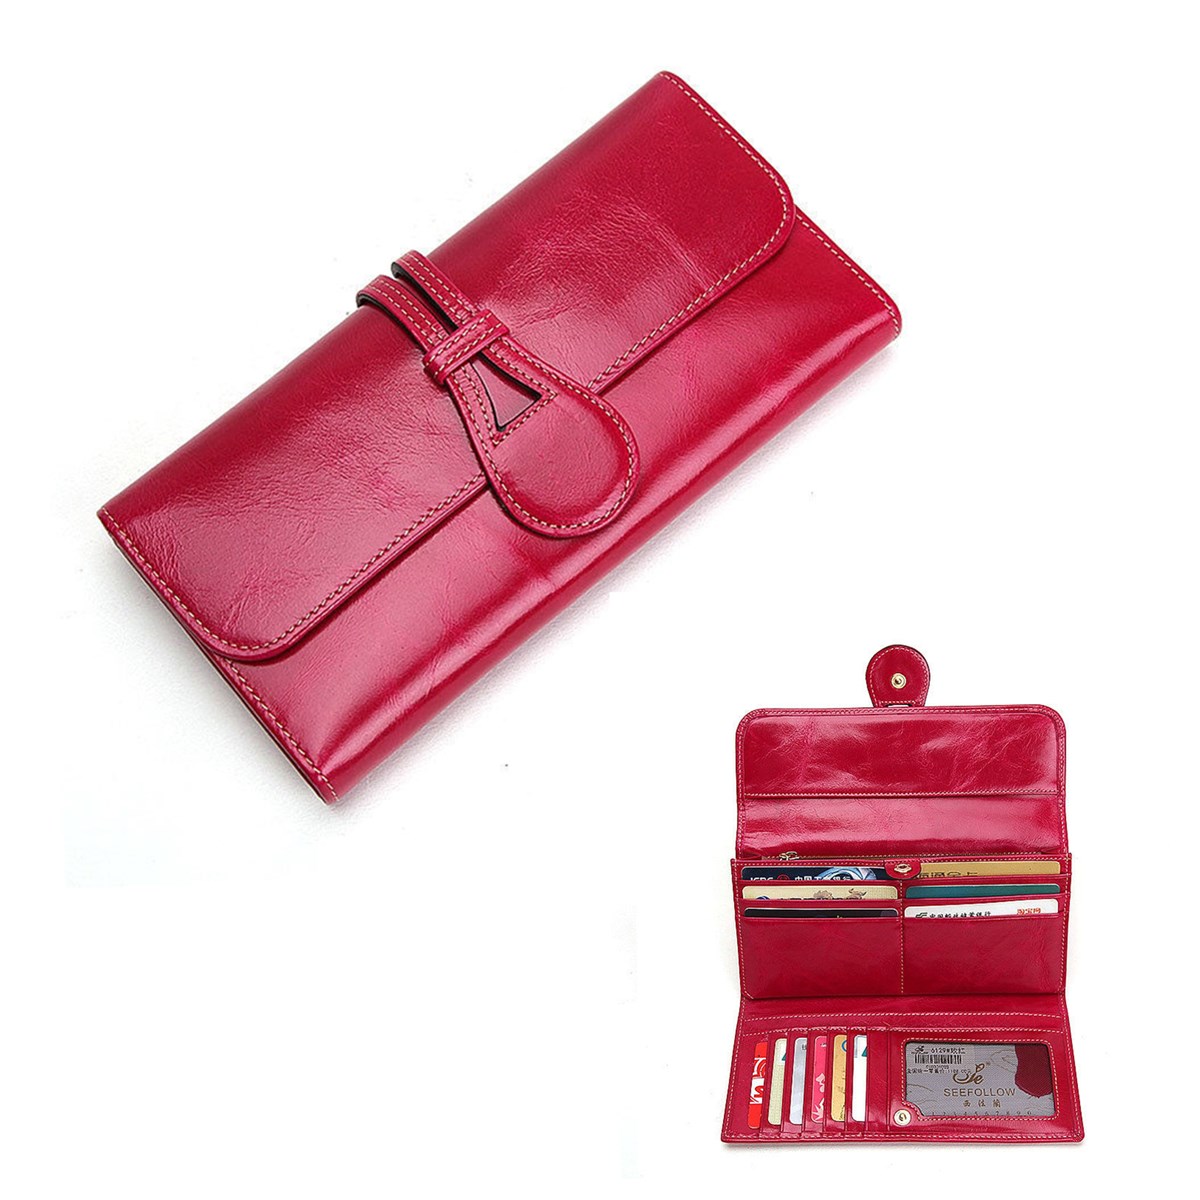 

Women Genuine Leather Trifold Long Wallet Money Purse Card Holder Phone Bag for under 6 inches Phone